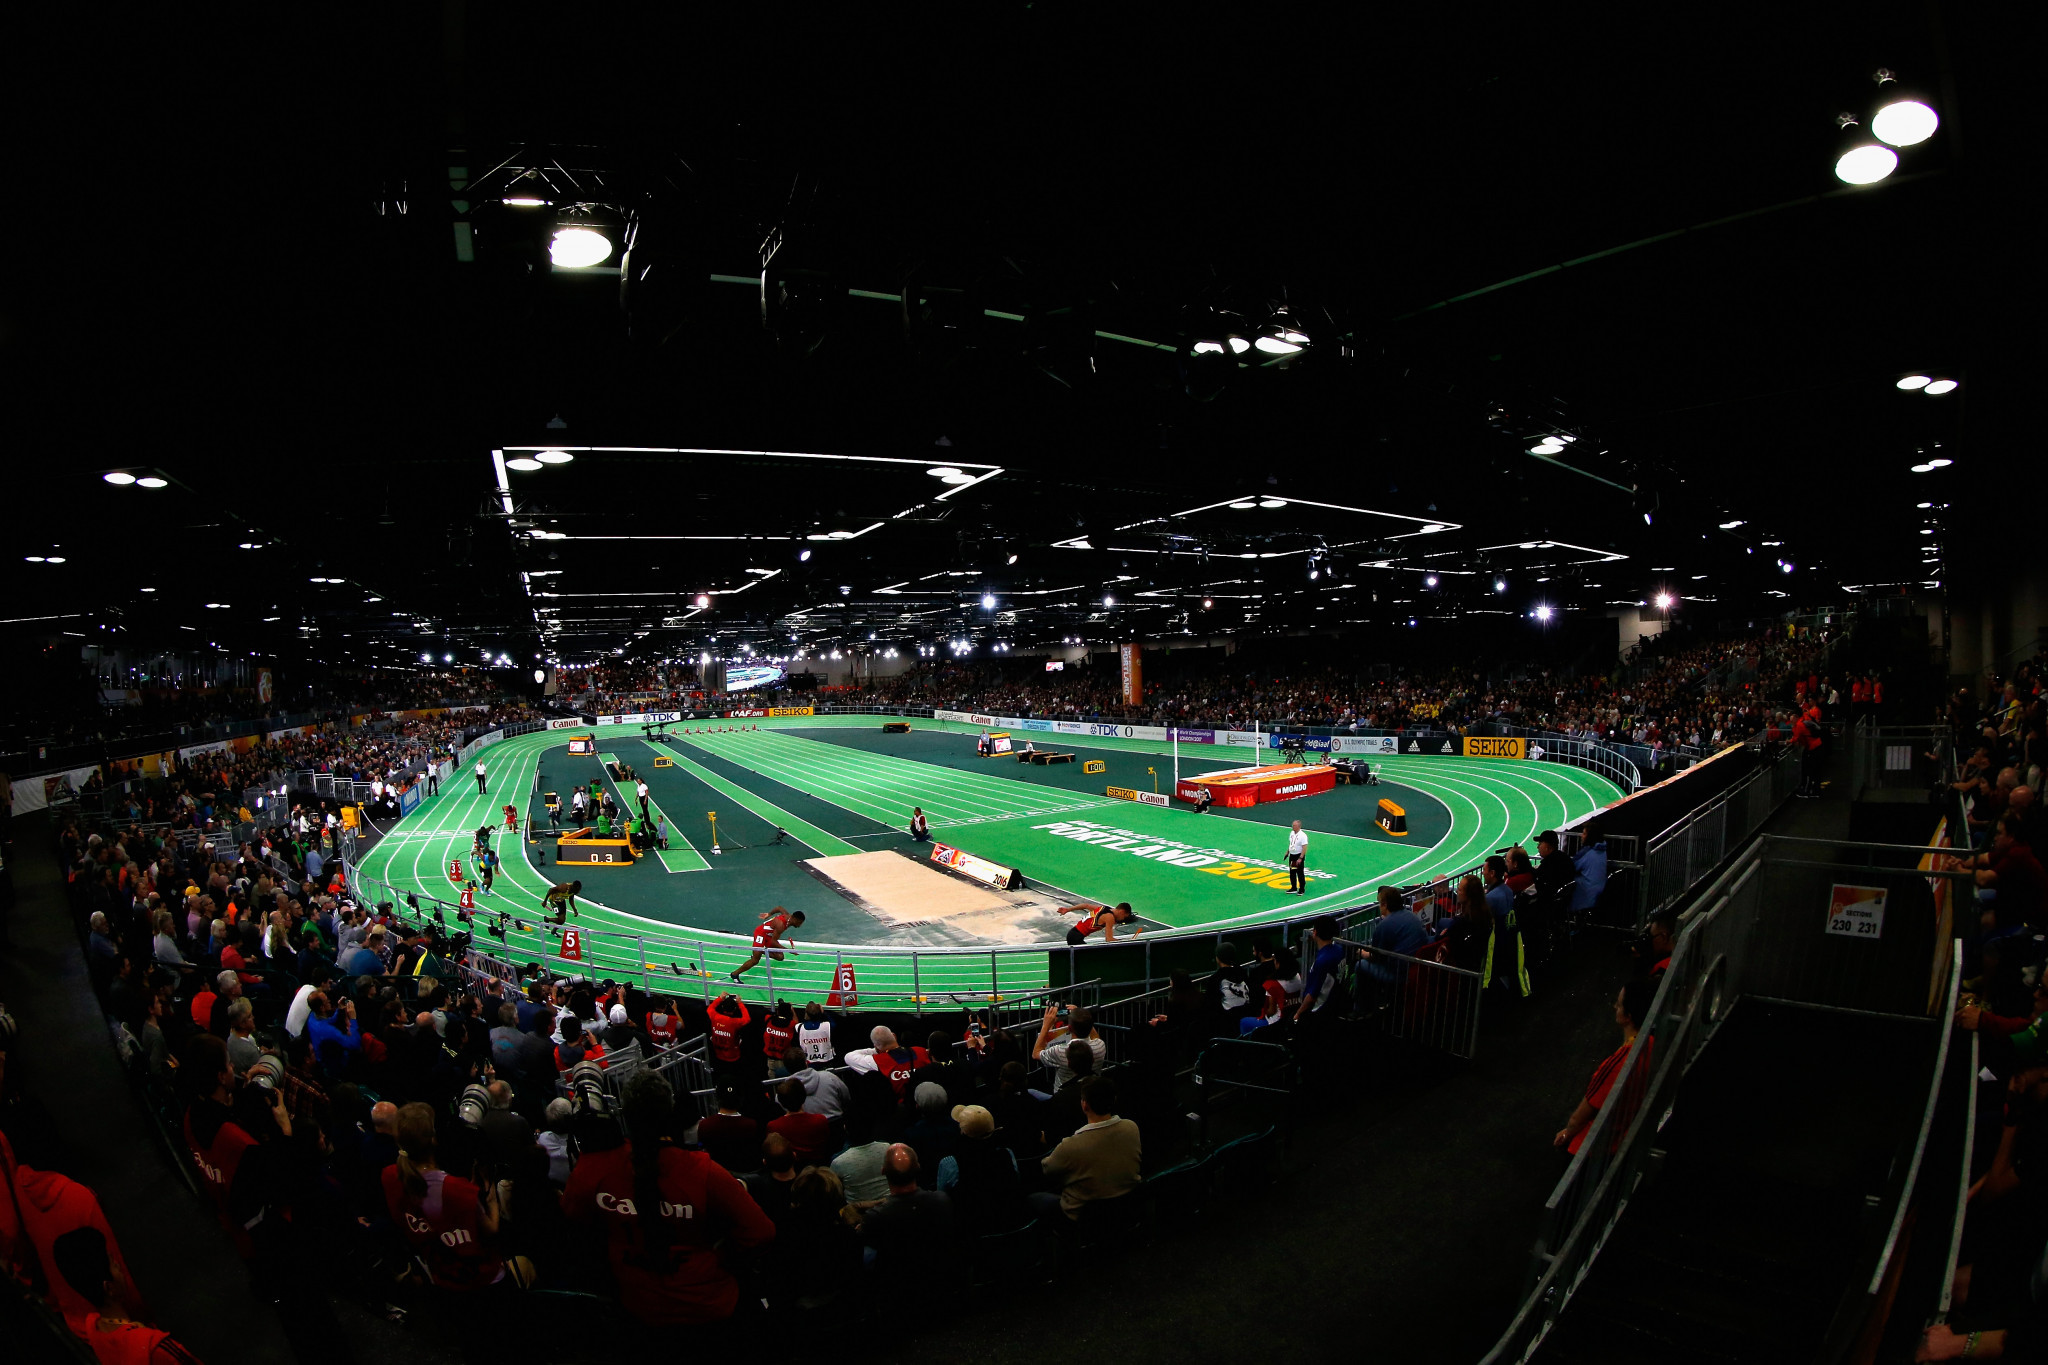 The Oregon Convention Center, a previous host of athletics events, provided the stage for the 2019 Pan American Cadet and Junior Poomsae Championships ©Getty Images